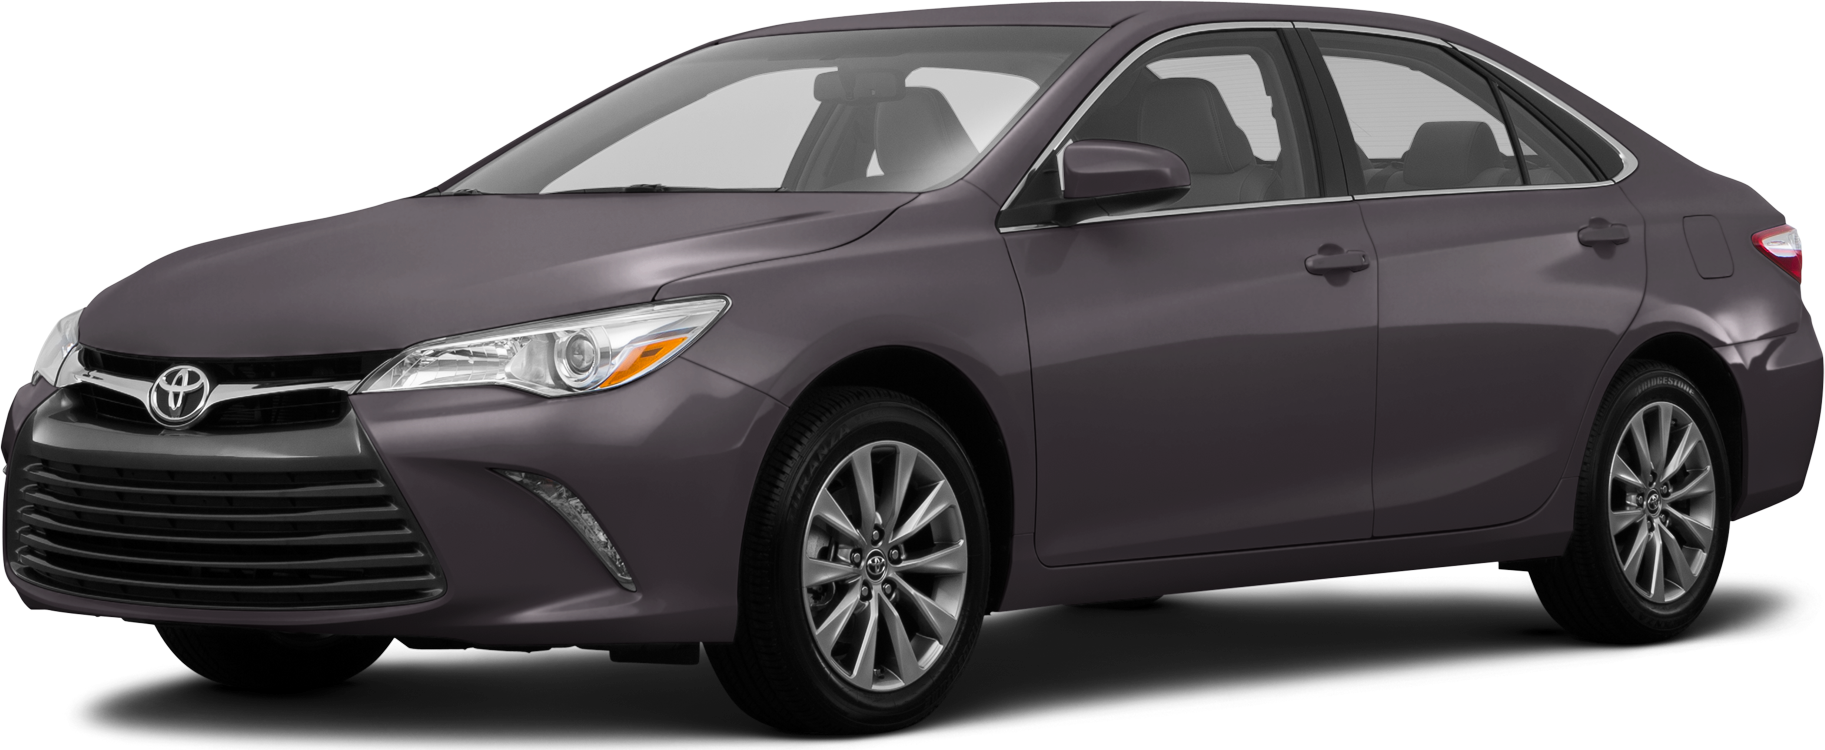 2017 Toyota Camry Values & Cars for Sale | Kelley Blue Book